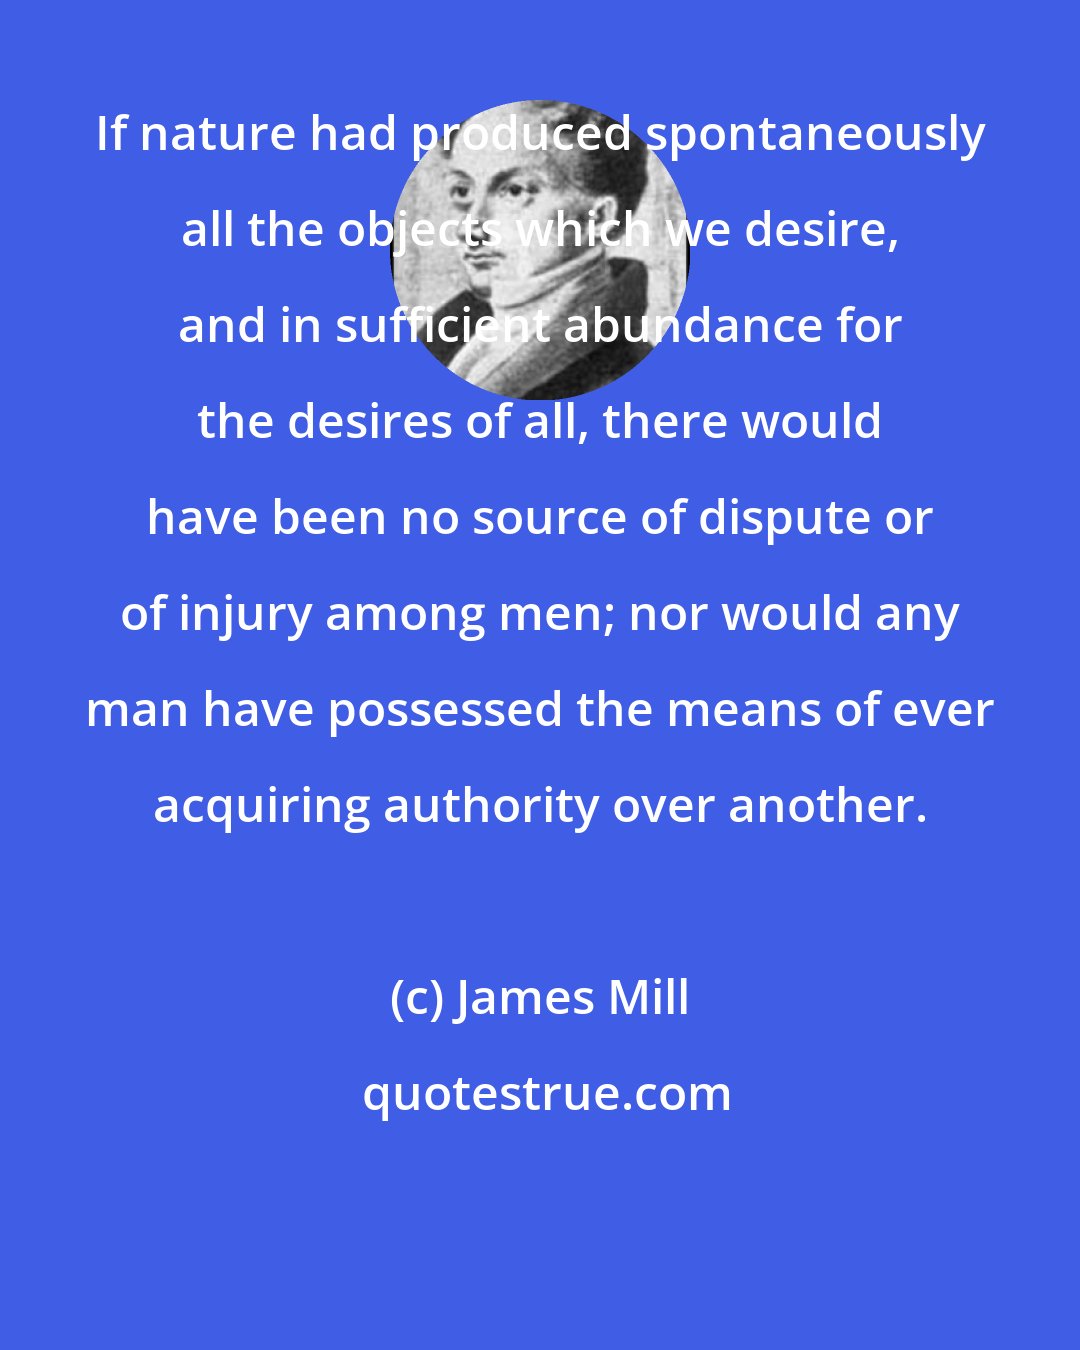 James Mill: If nature had produced spontaneously all the objects which we desire, and in sufficient abundance for the desires of all, there would have been no source of dispute or of injury among men; nor would any man have possessed the means of ever acquiring authority over another.